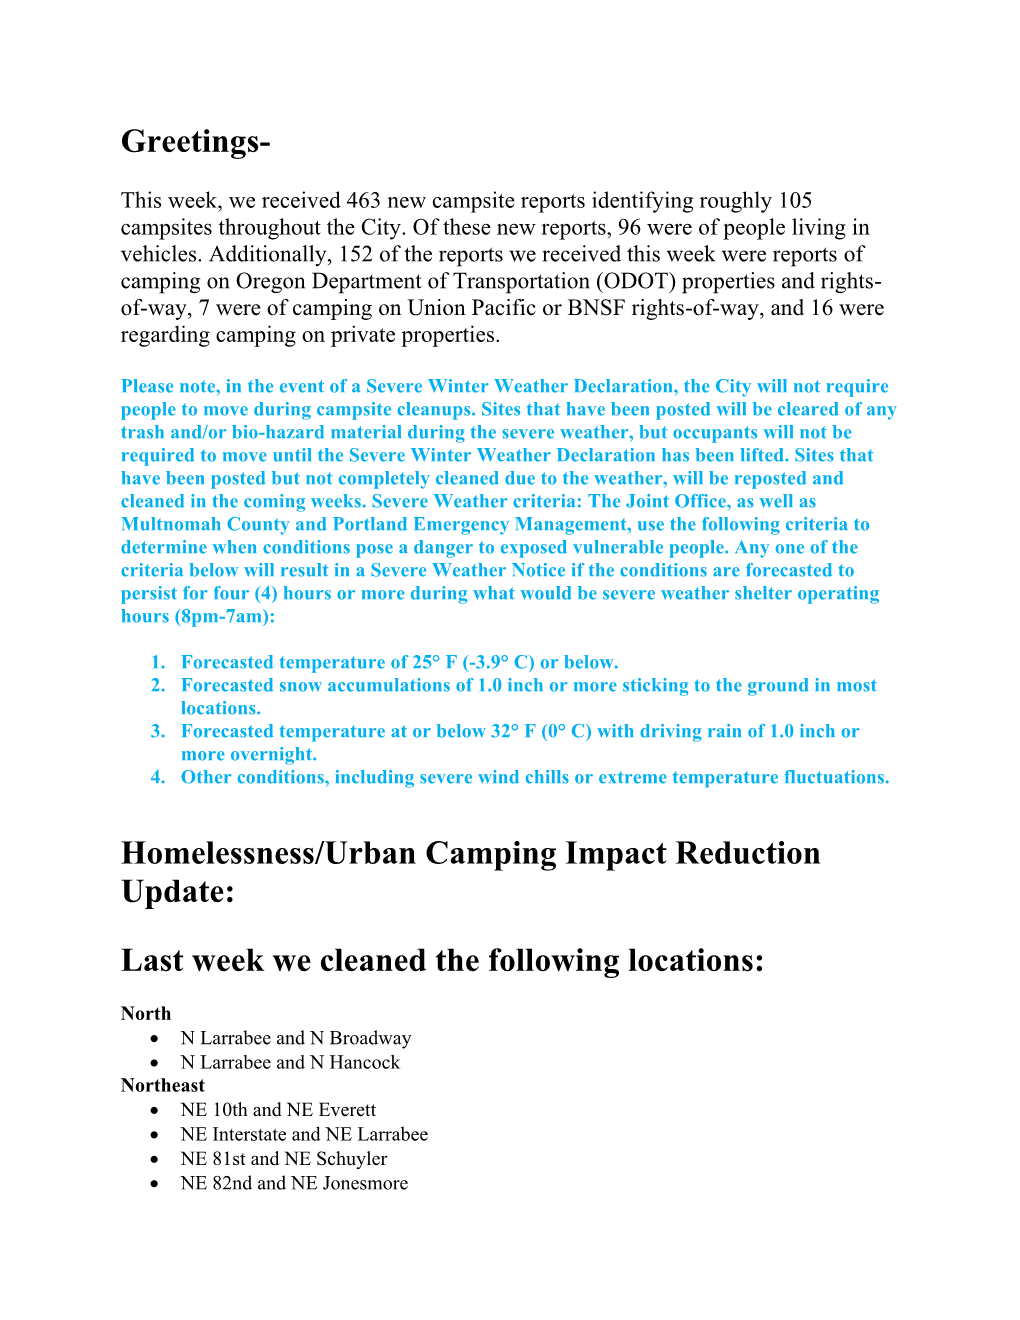 Homelessness/Urban Camping Impact Reduction Update